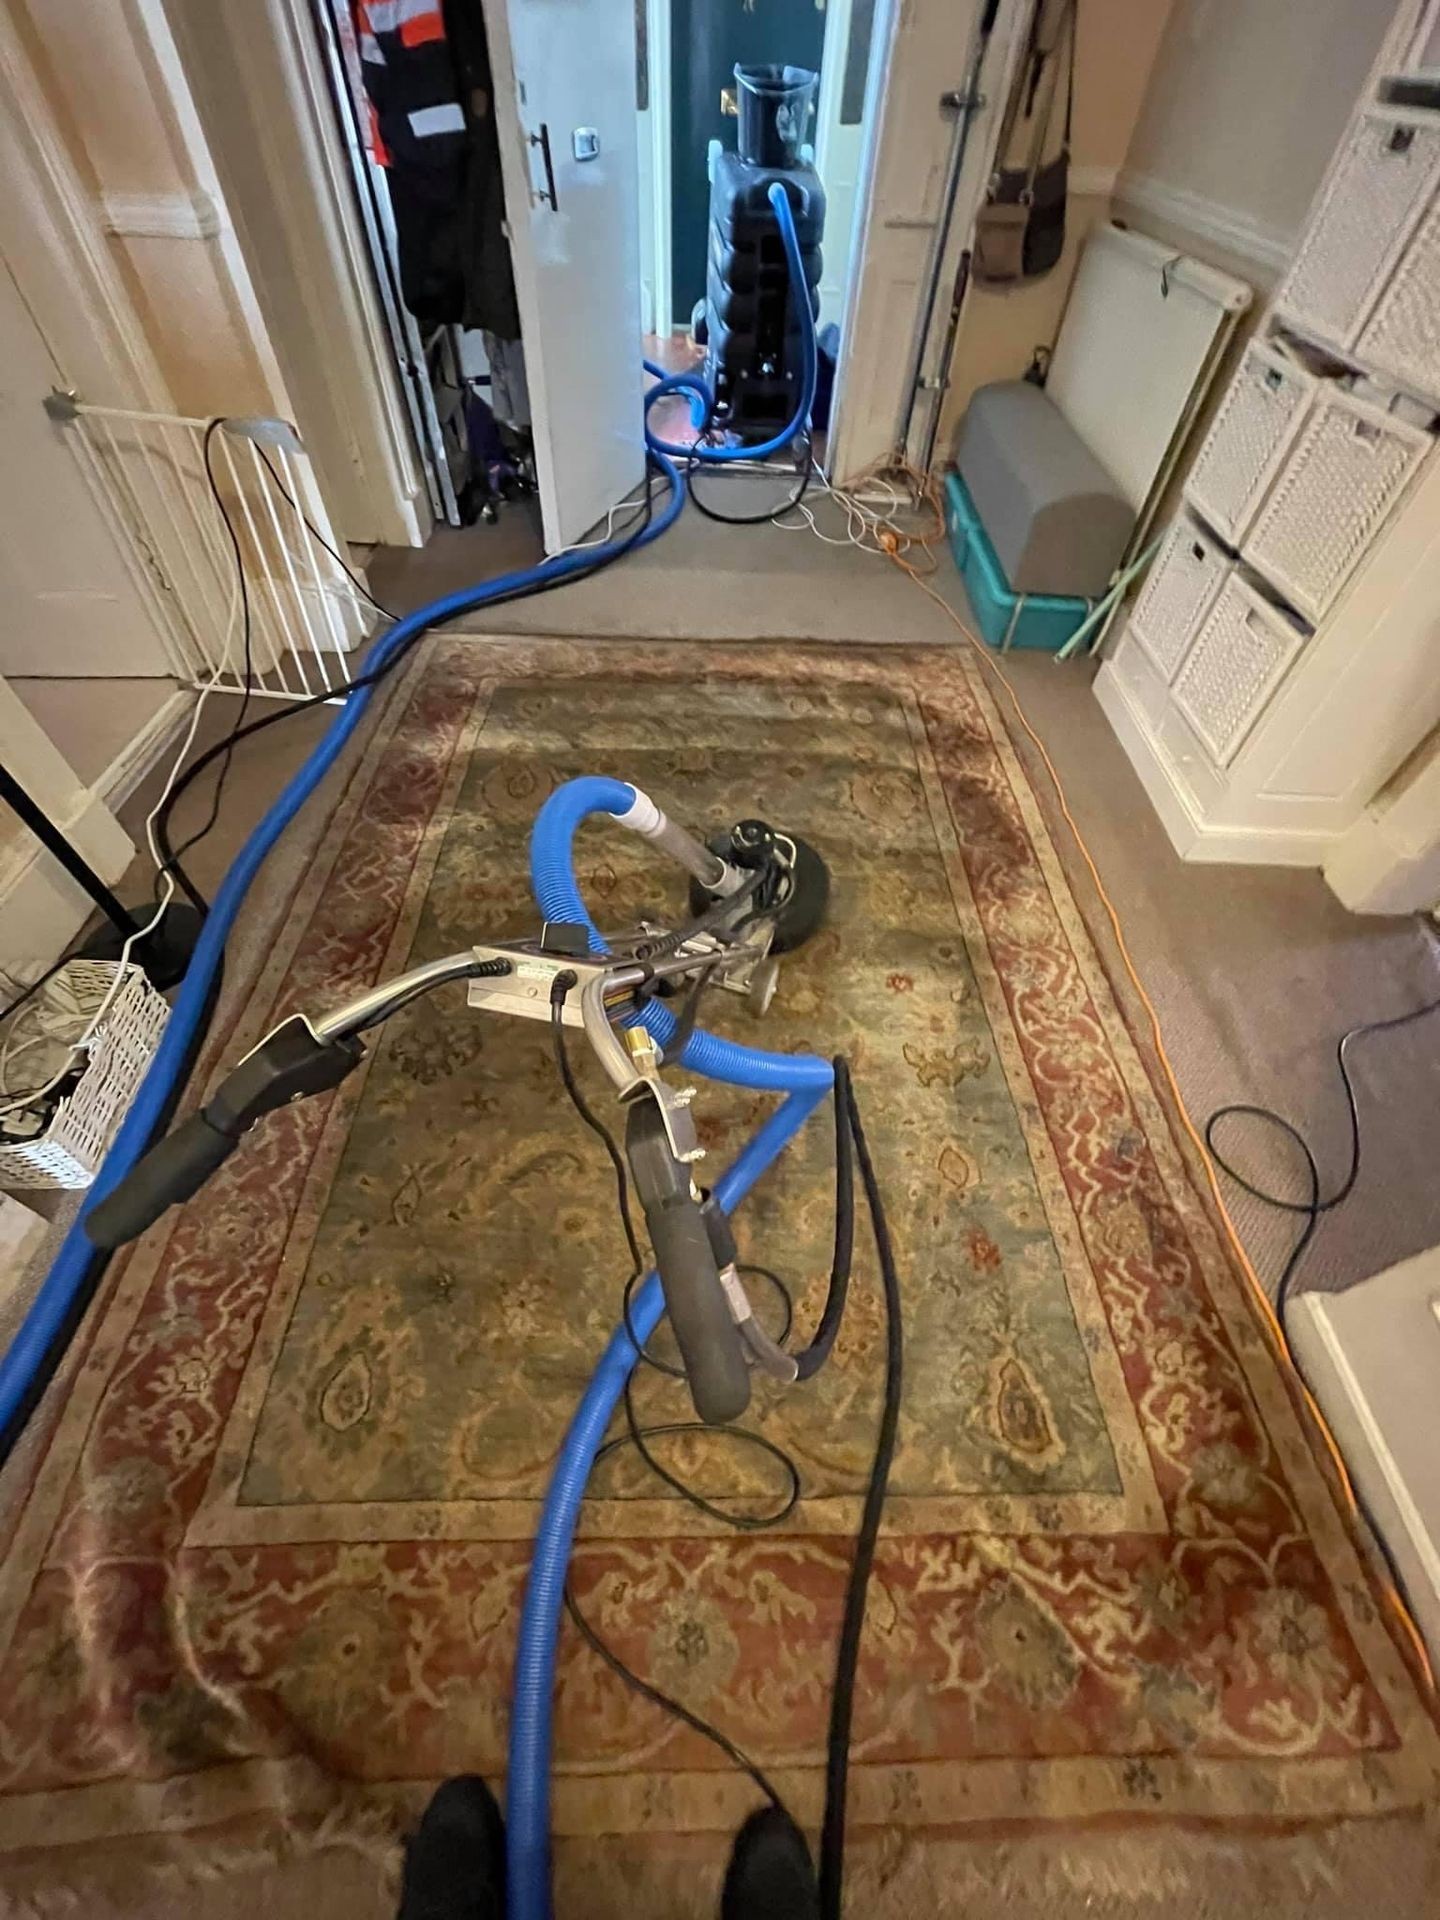 Rug cleaning Glasgow rug cleaner near me rug odour and stain removal Glasgow 